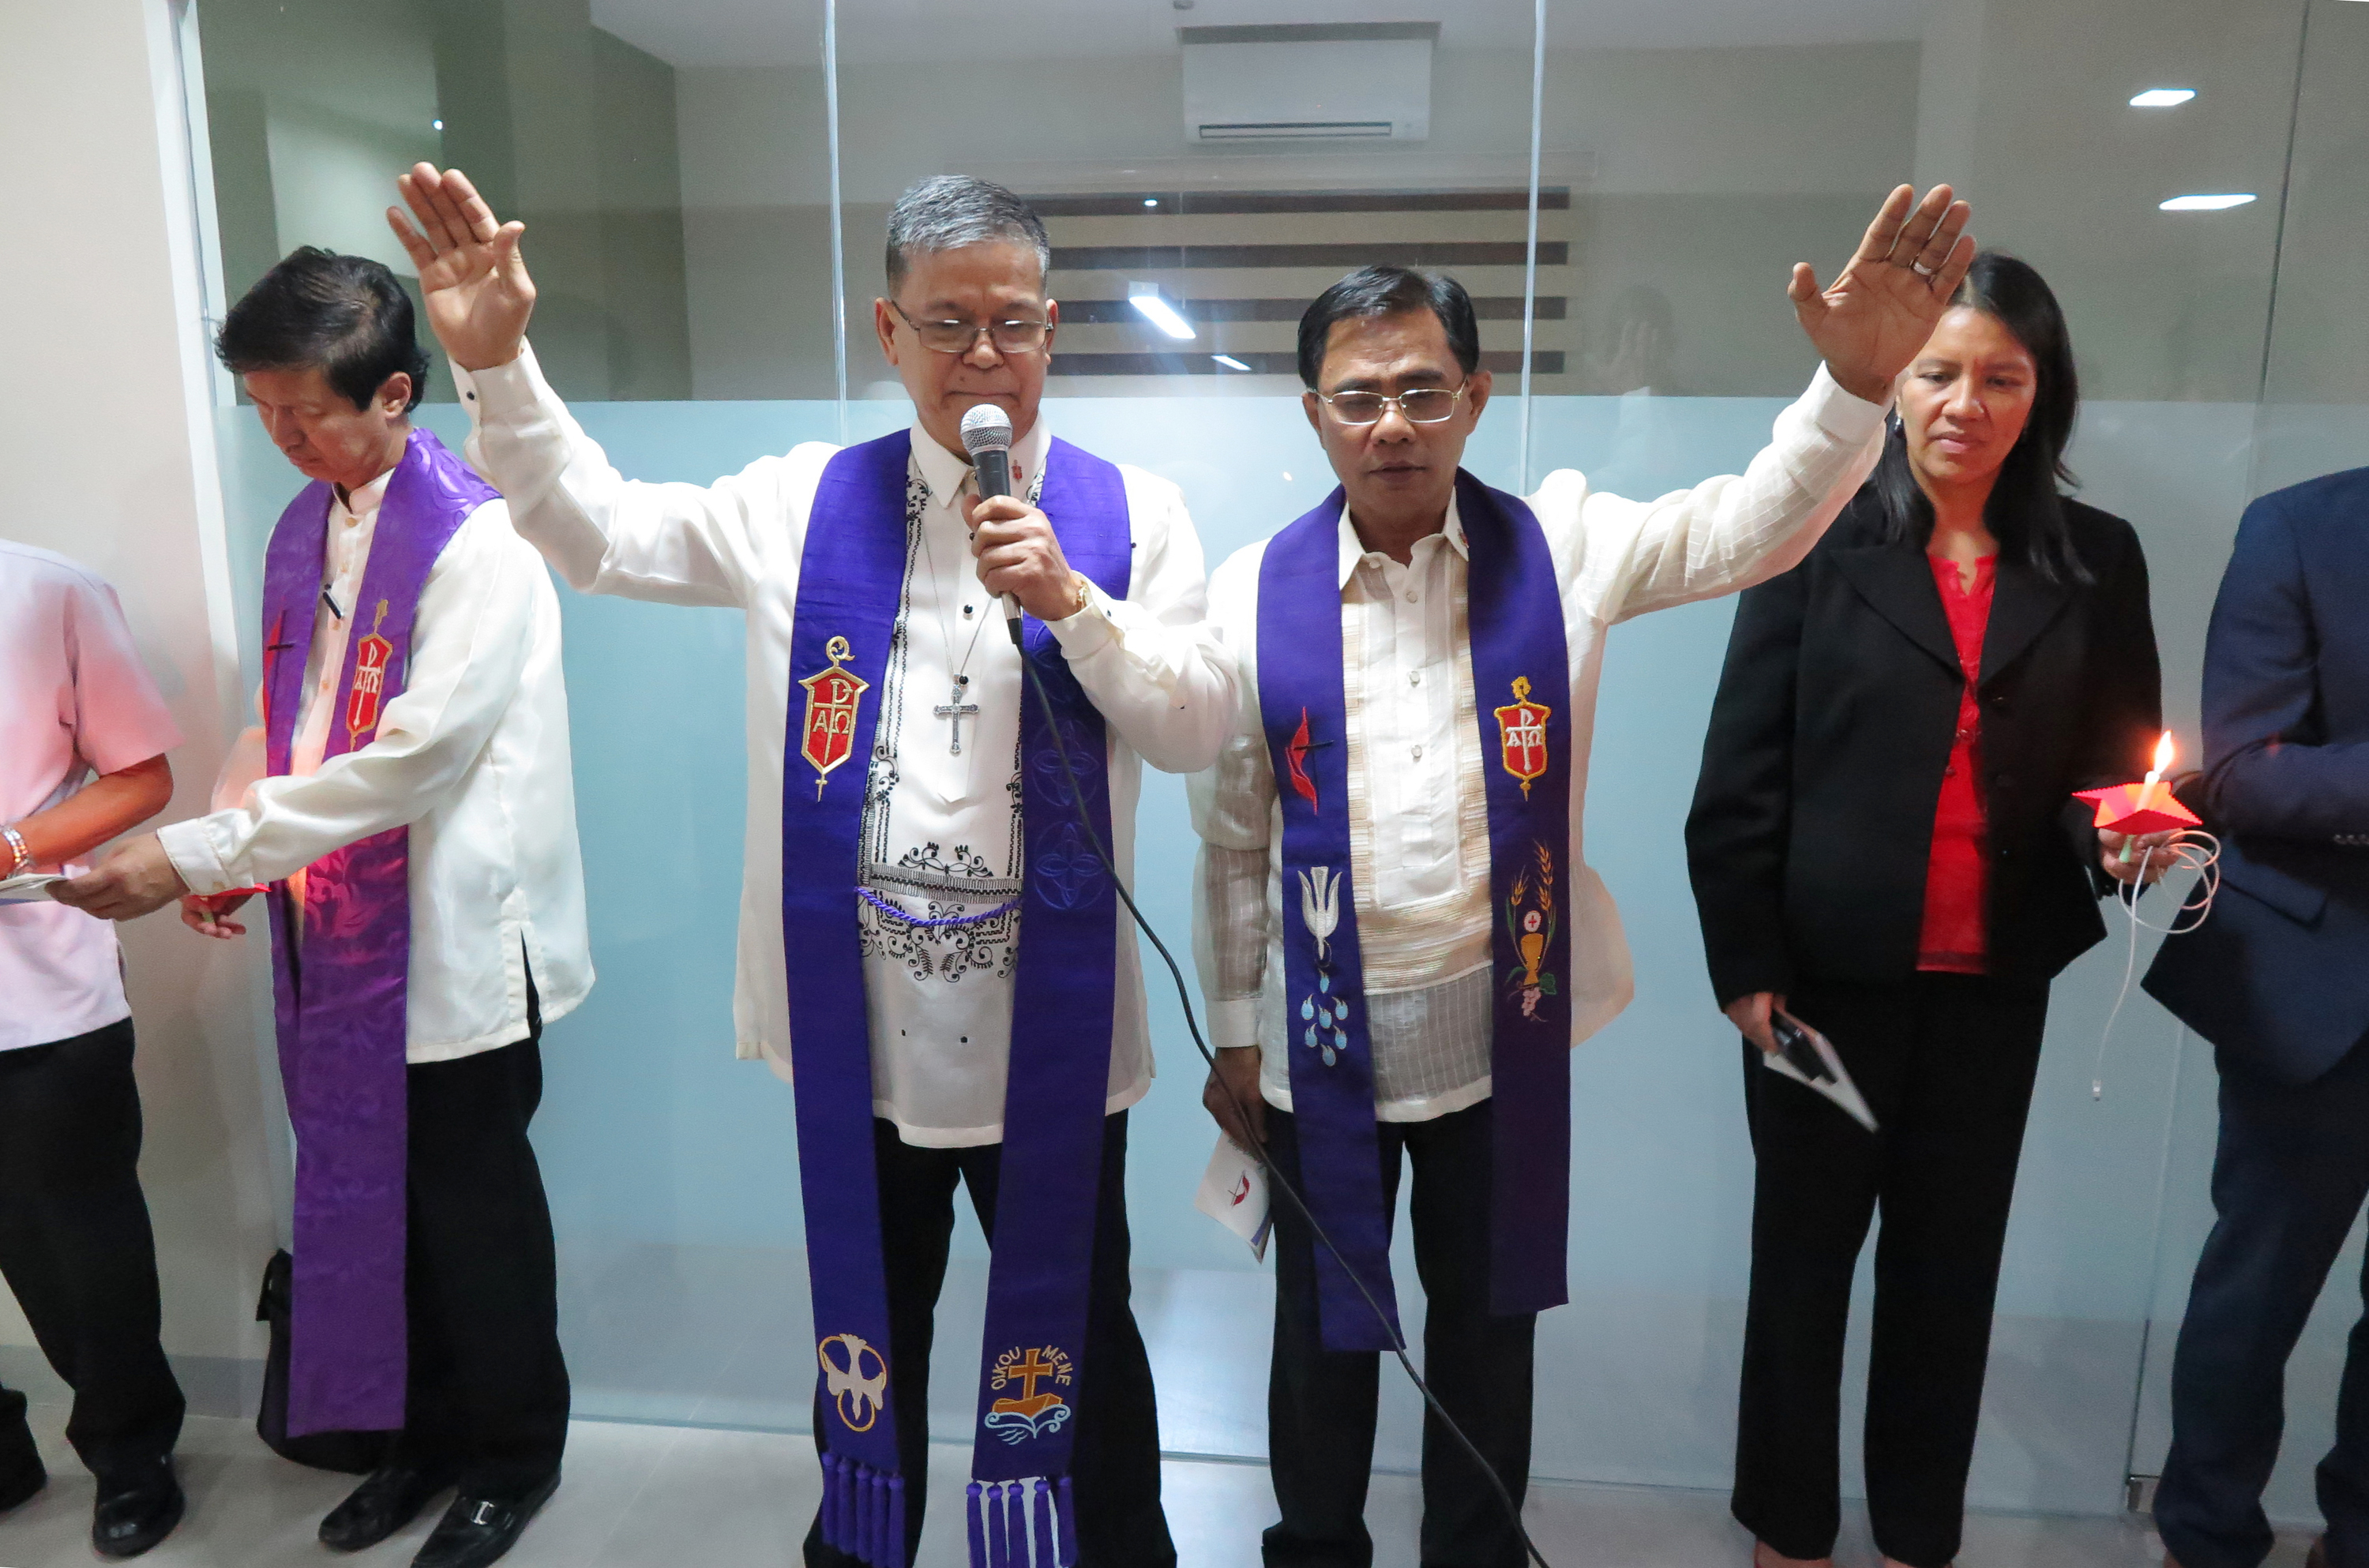 Bishops Ciriaco Q. Francisco and Rodolfo A. Juan raise their hands in blessing during the dedication ceremony. Bishop Pedro M.  Torio Jr. and the Rev. Amy Valdez-Barker are in the background. Photo by Tim Tanton, UMNS.